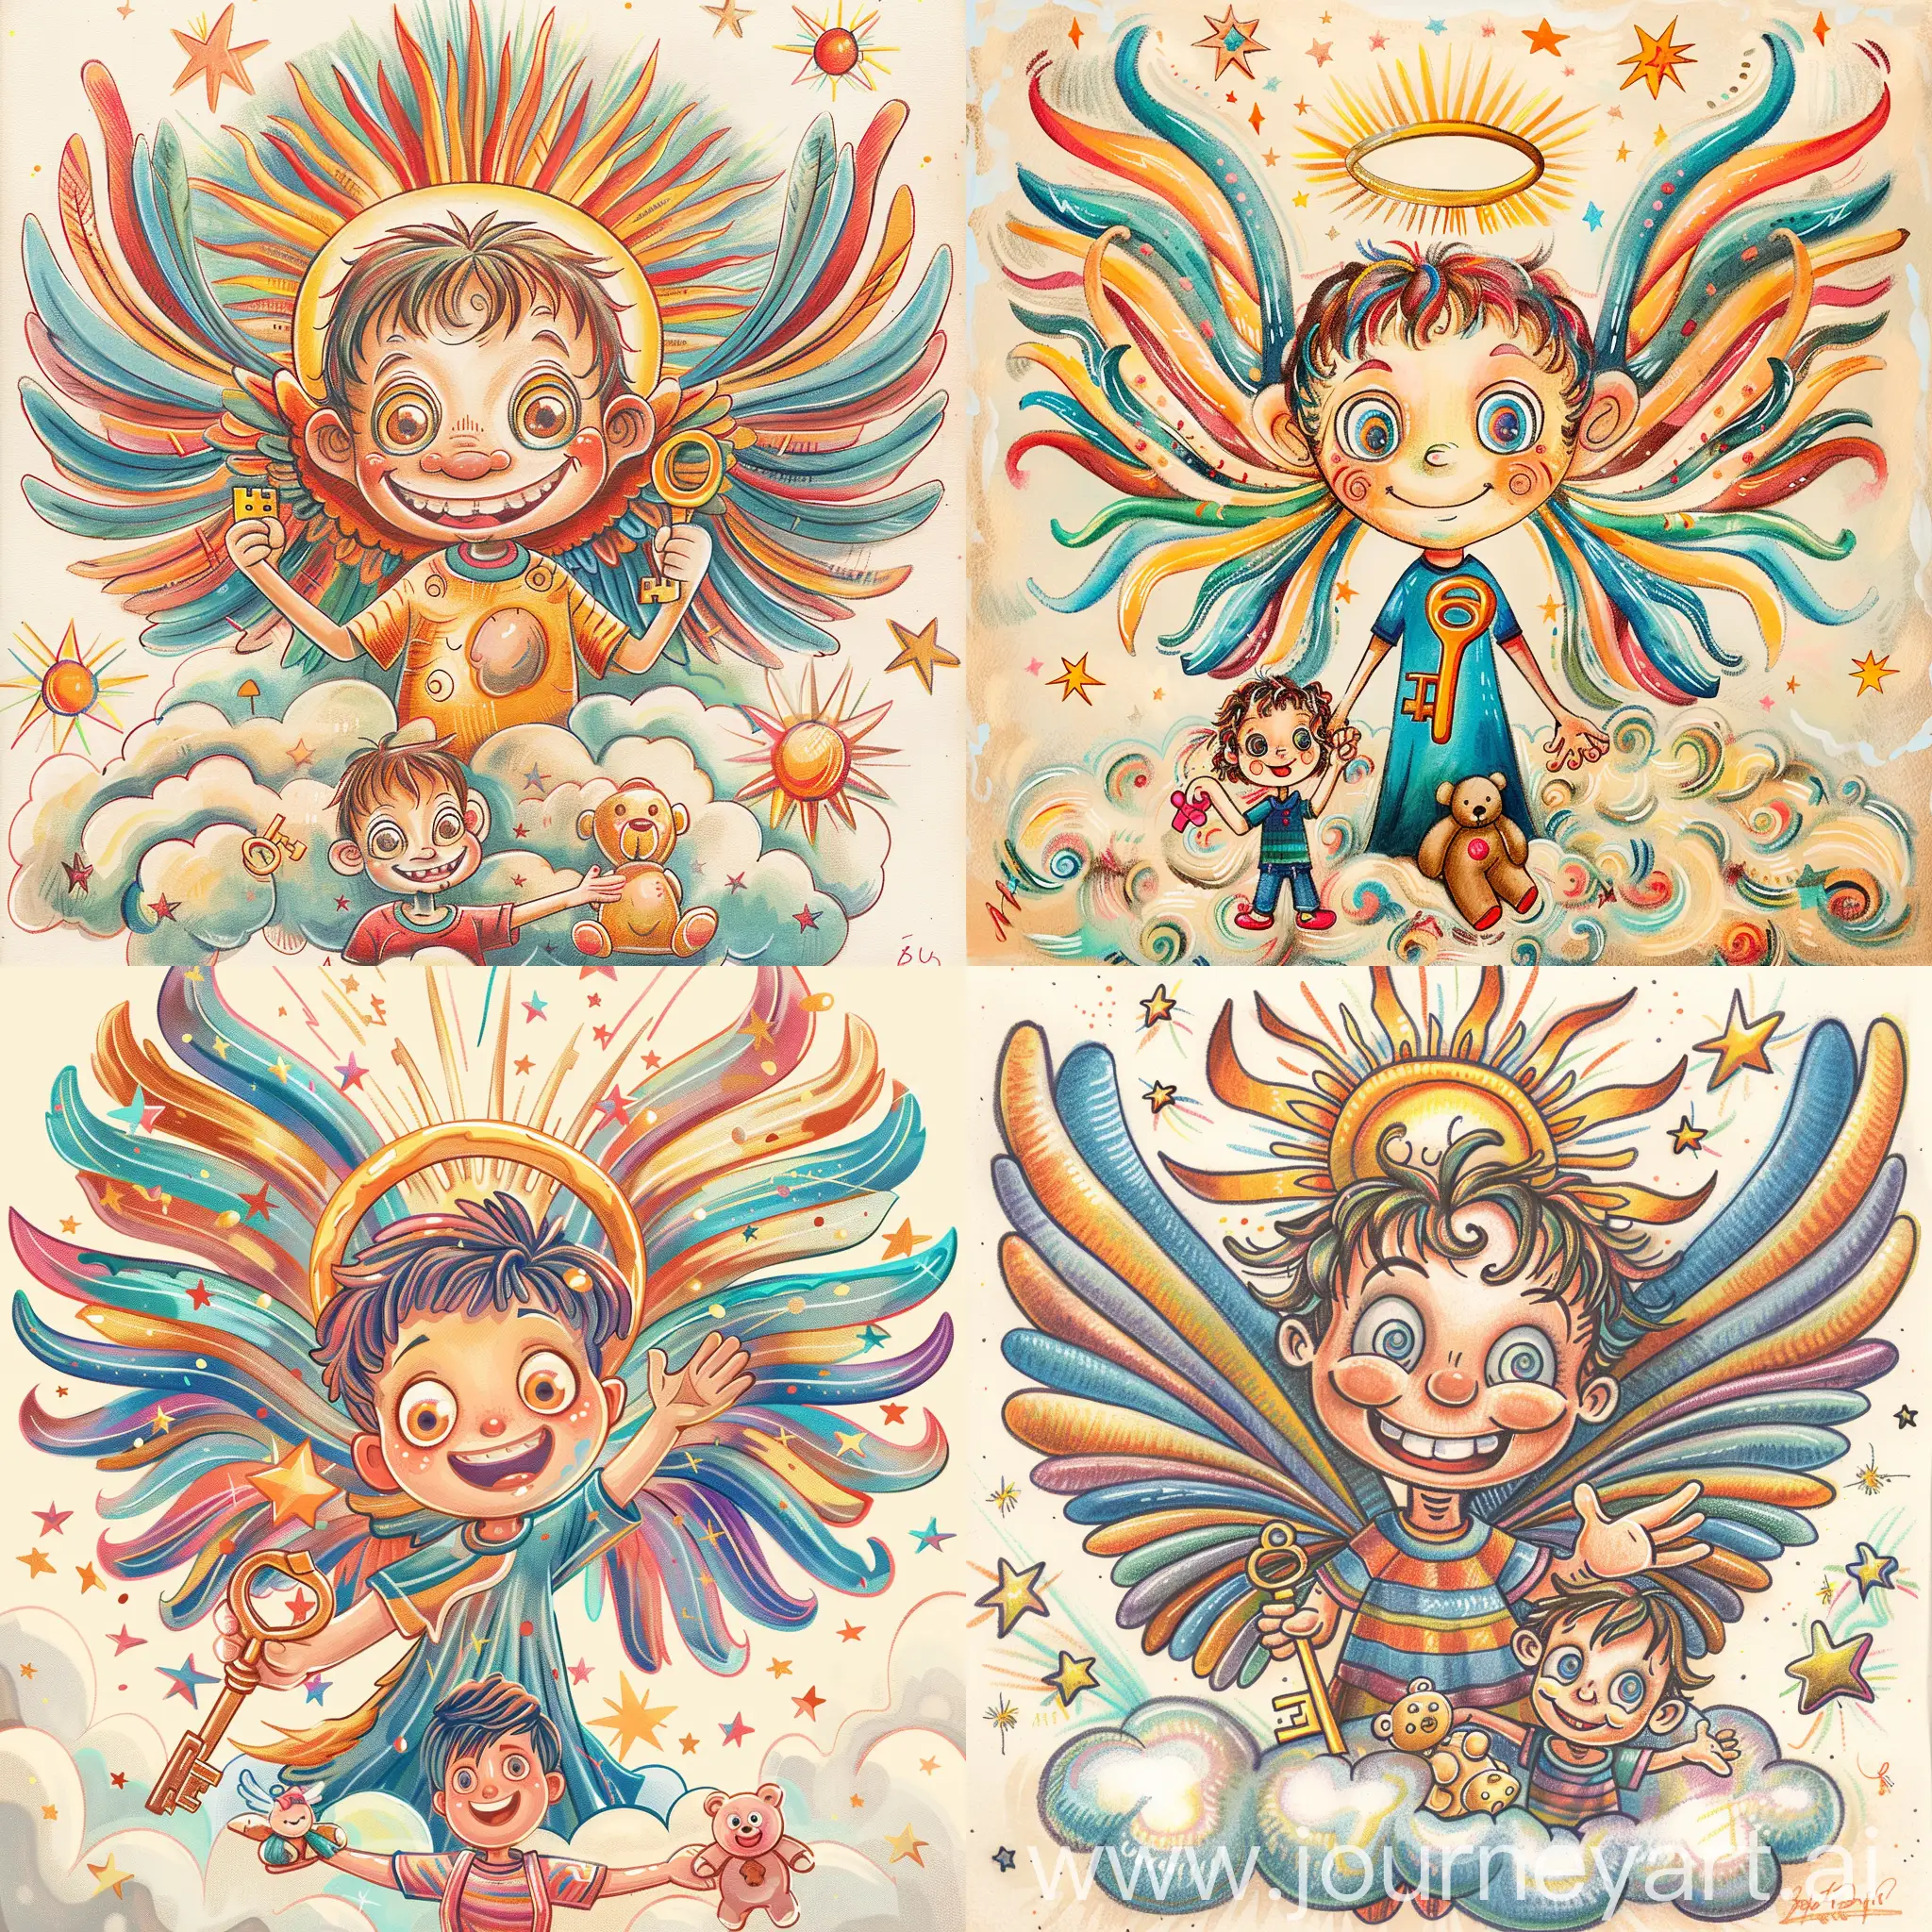 Guardian-Angel-with-Colorful-Wings-and-Smiling-Child-in-the-Clouds